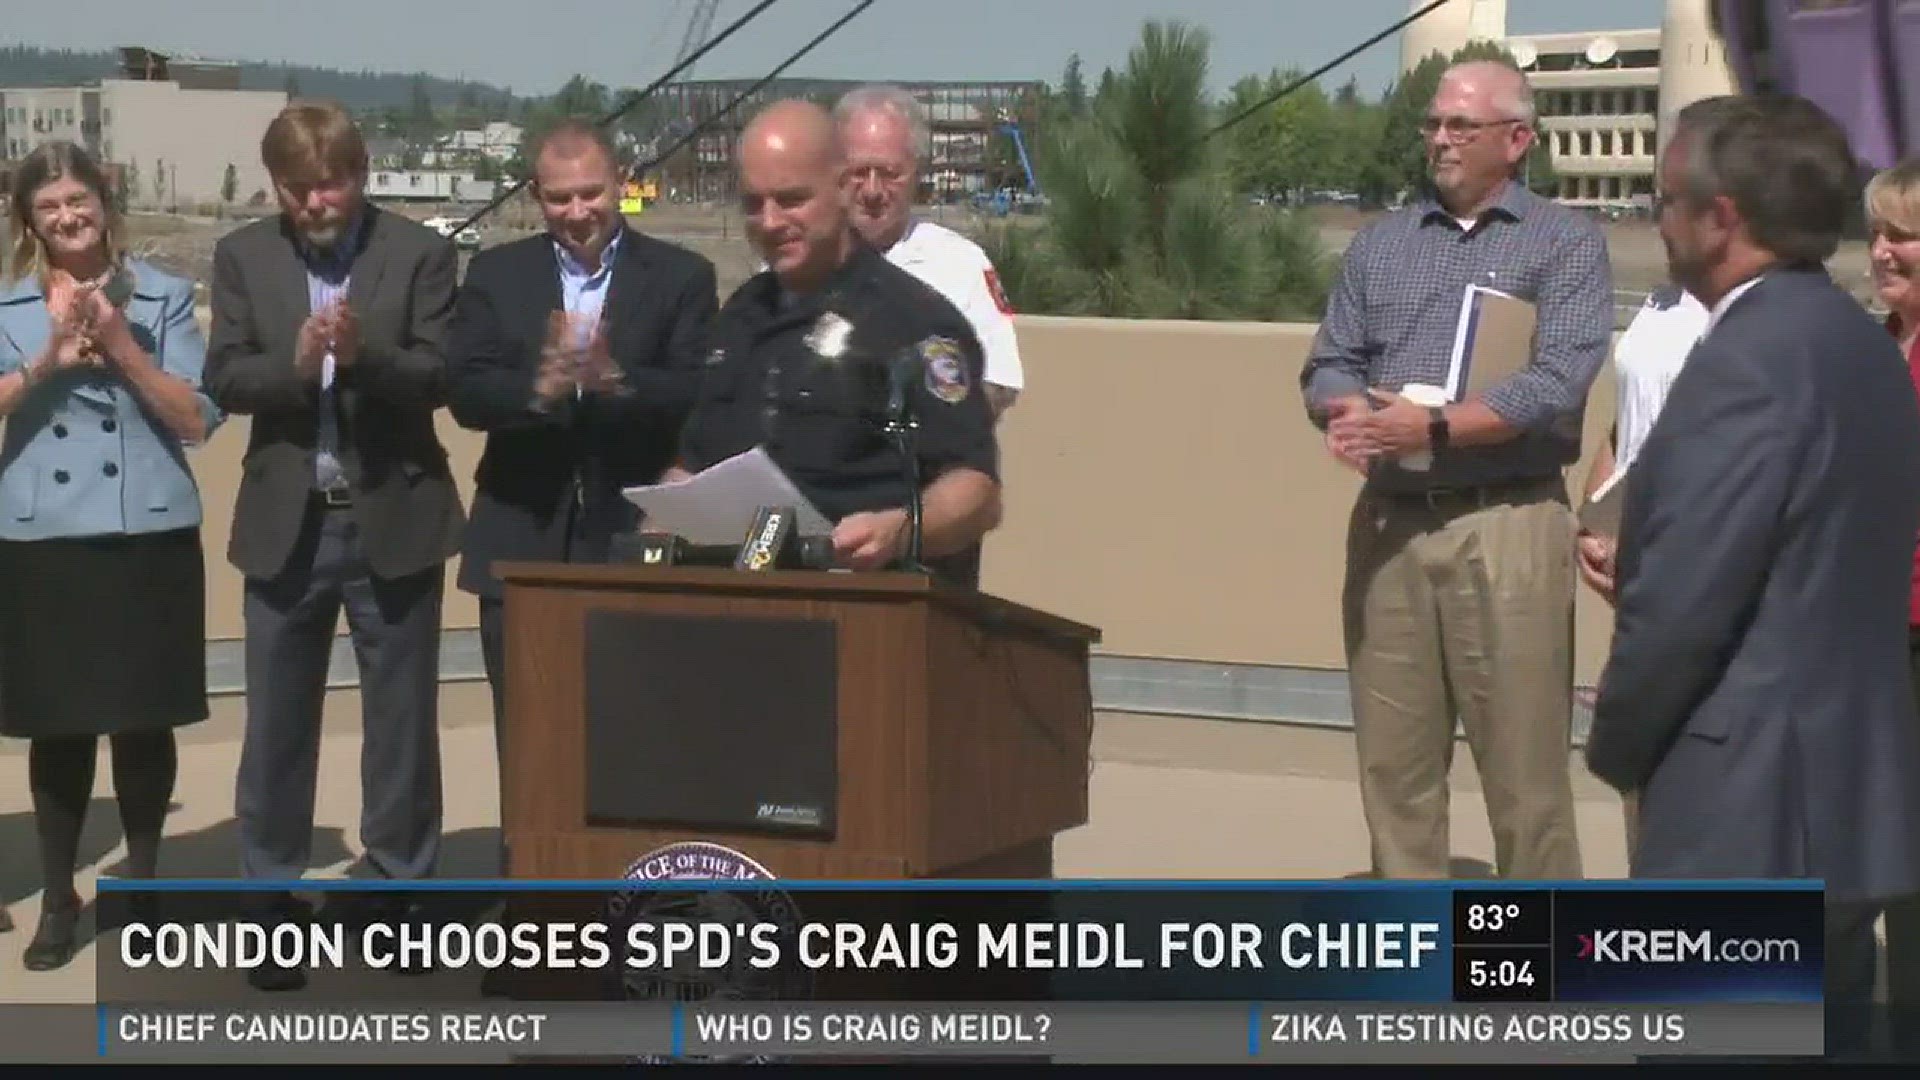 Condon chooses SPD's Craig Meidl for chief